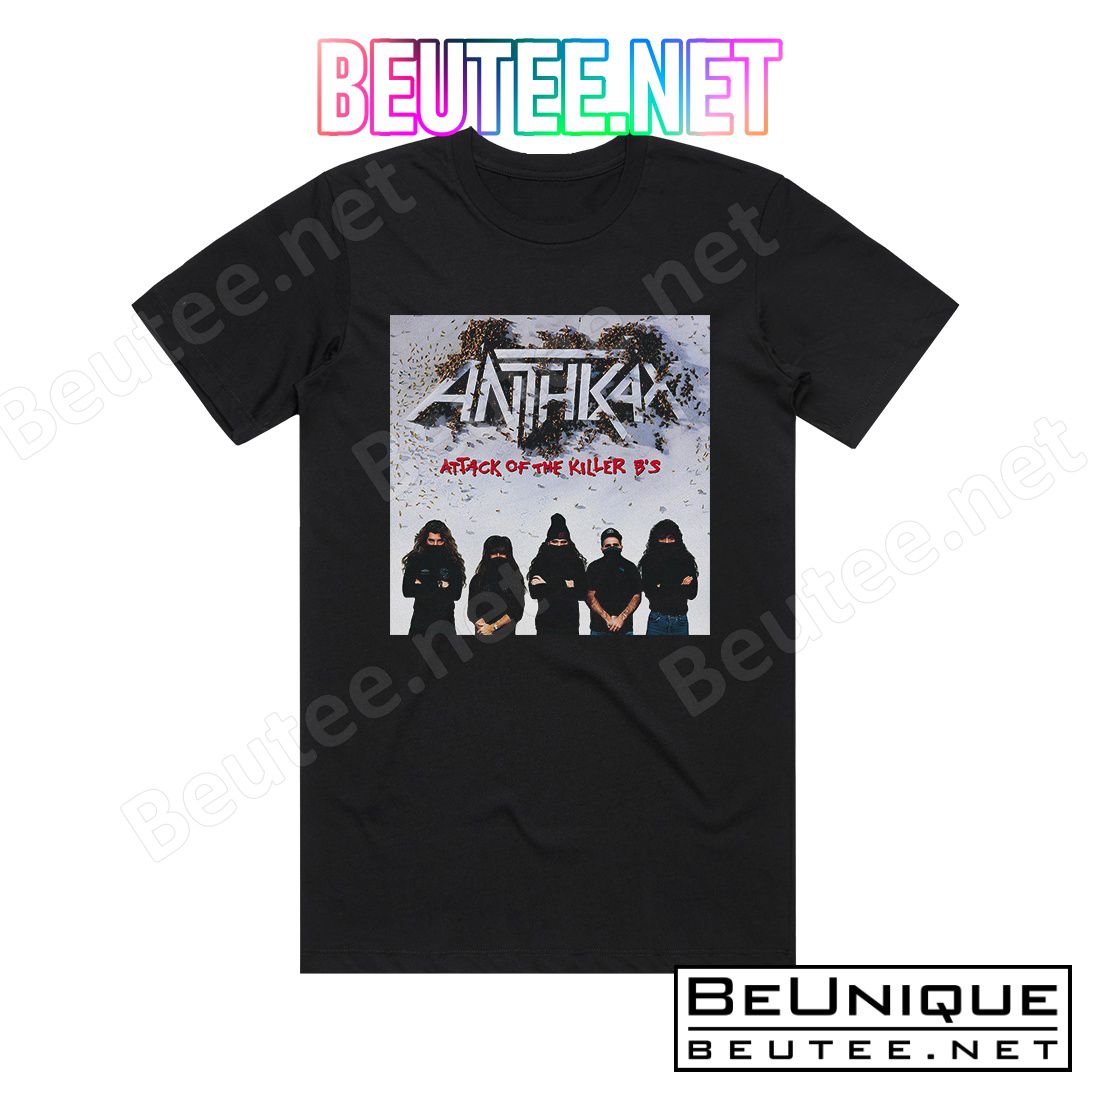 Anthrax Attack Of The Killer B's Album Cover T-Shirt